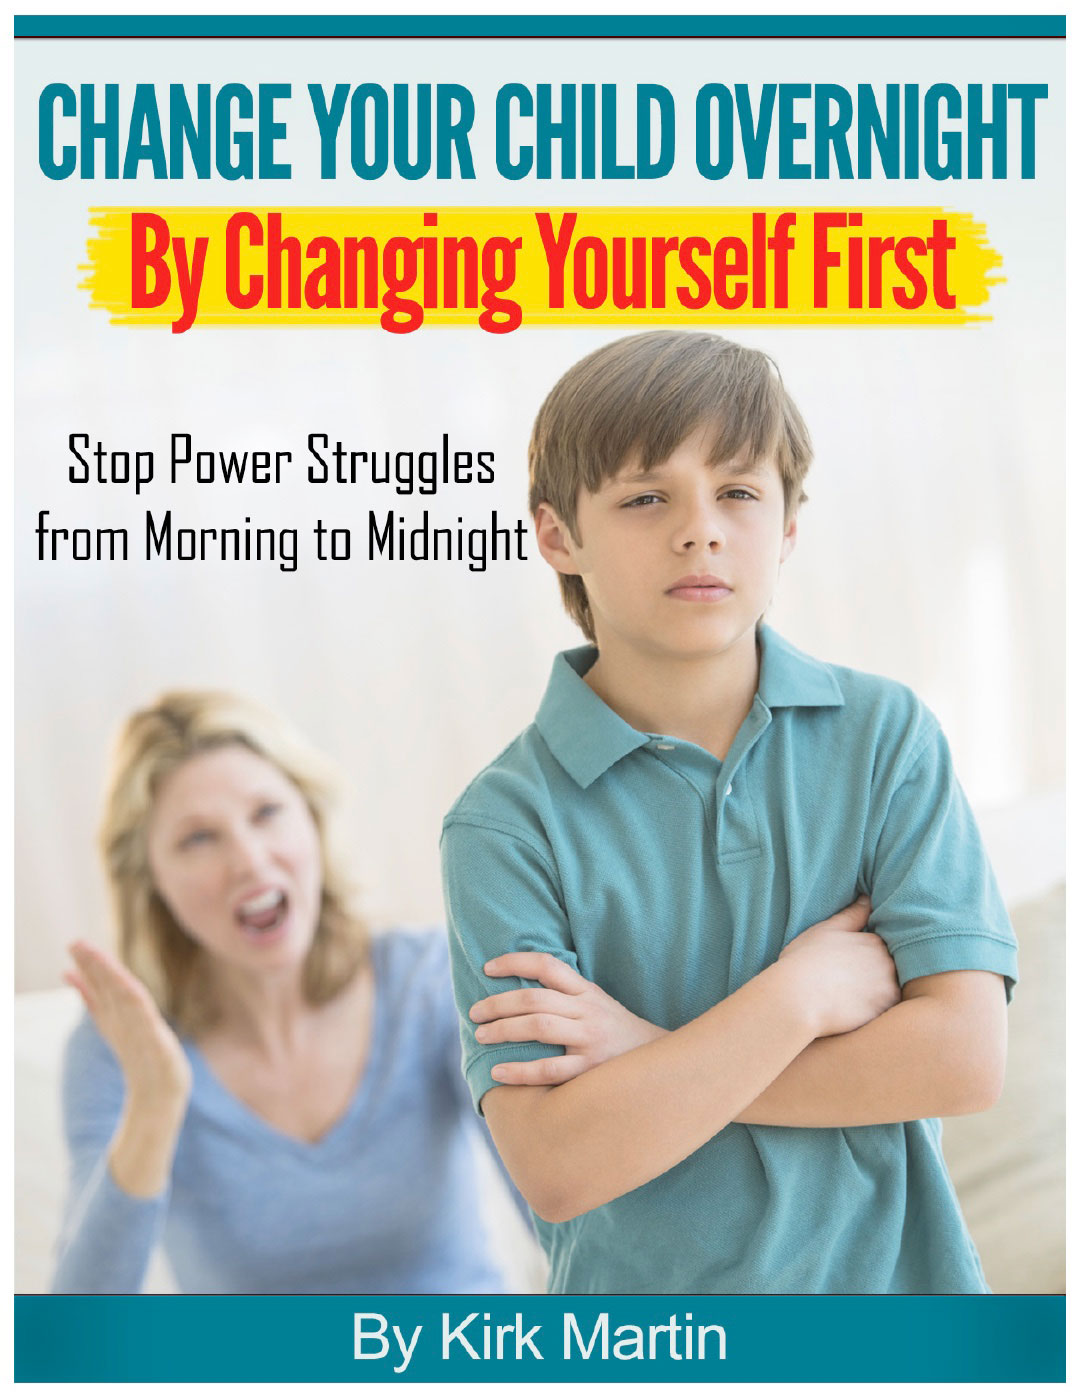 change your child overnight book